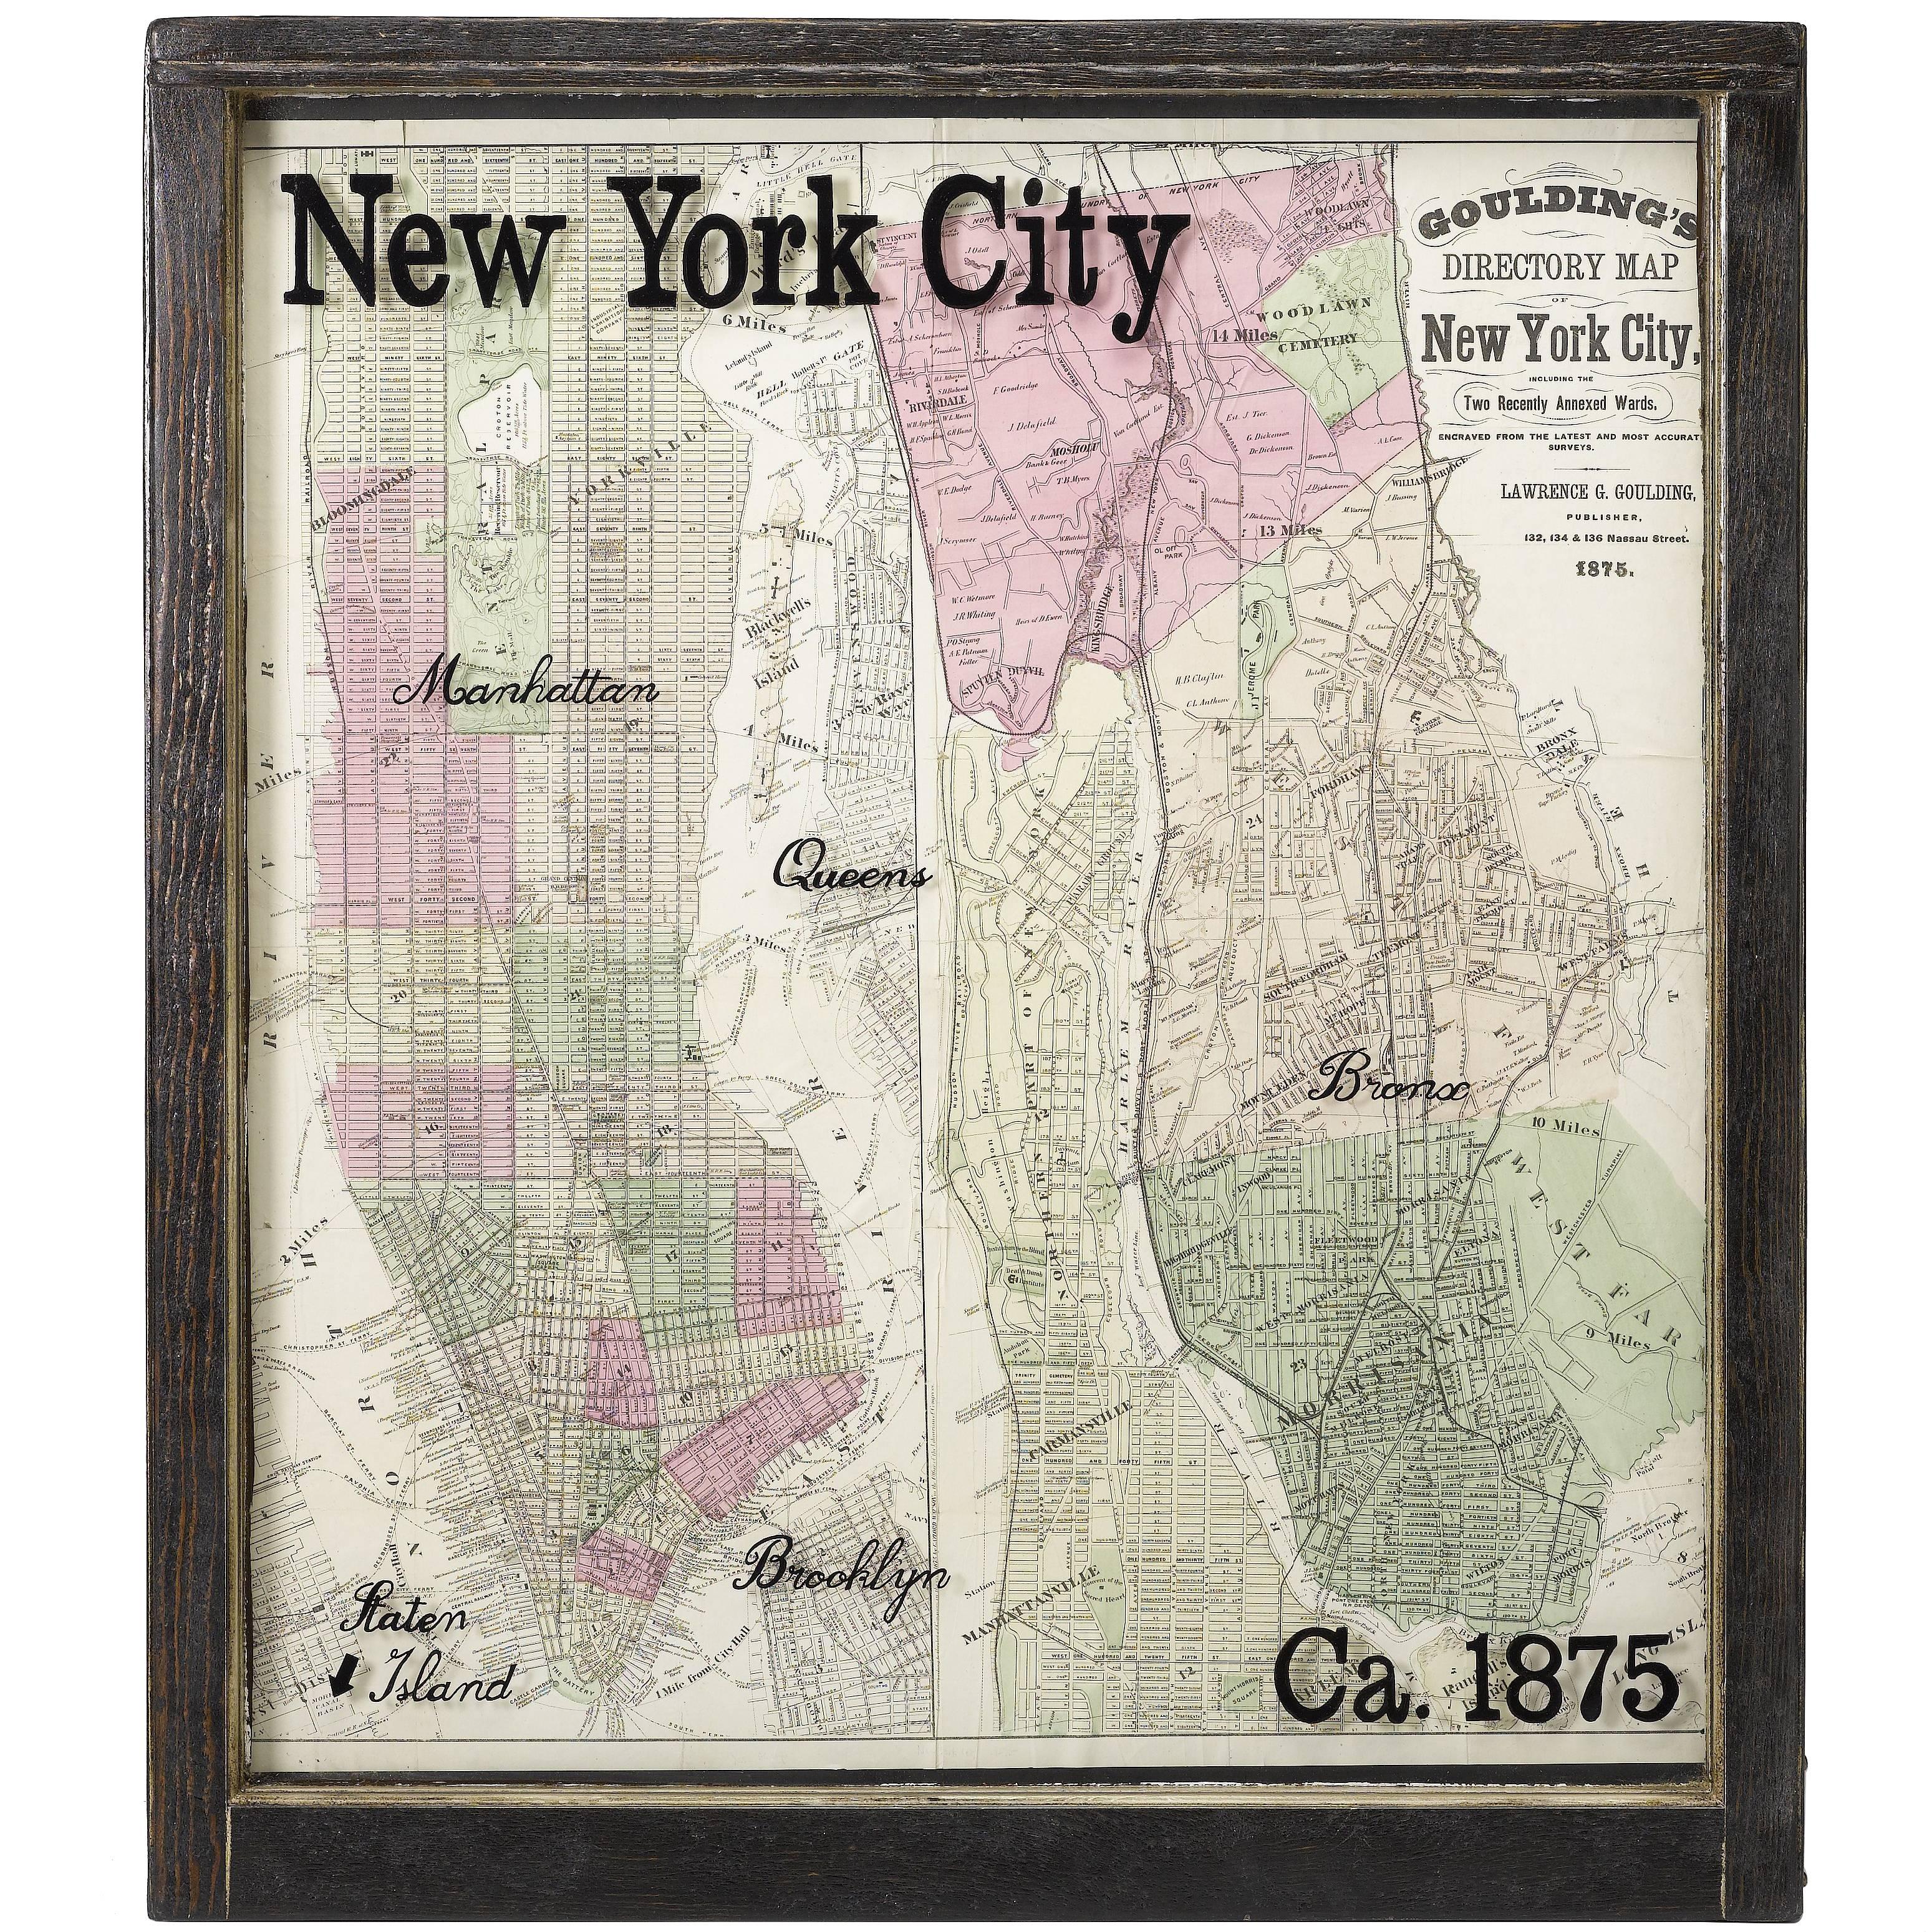 New York City Map with Surrounding Burroughs in Antique Windowpane, circa 1875